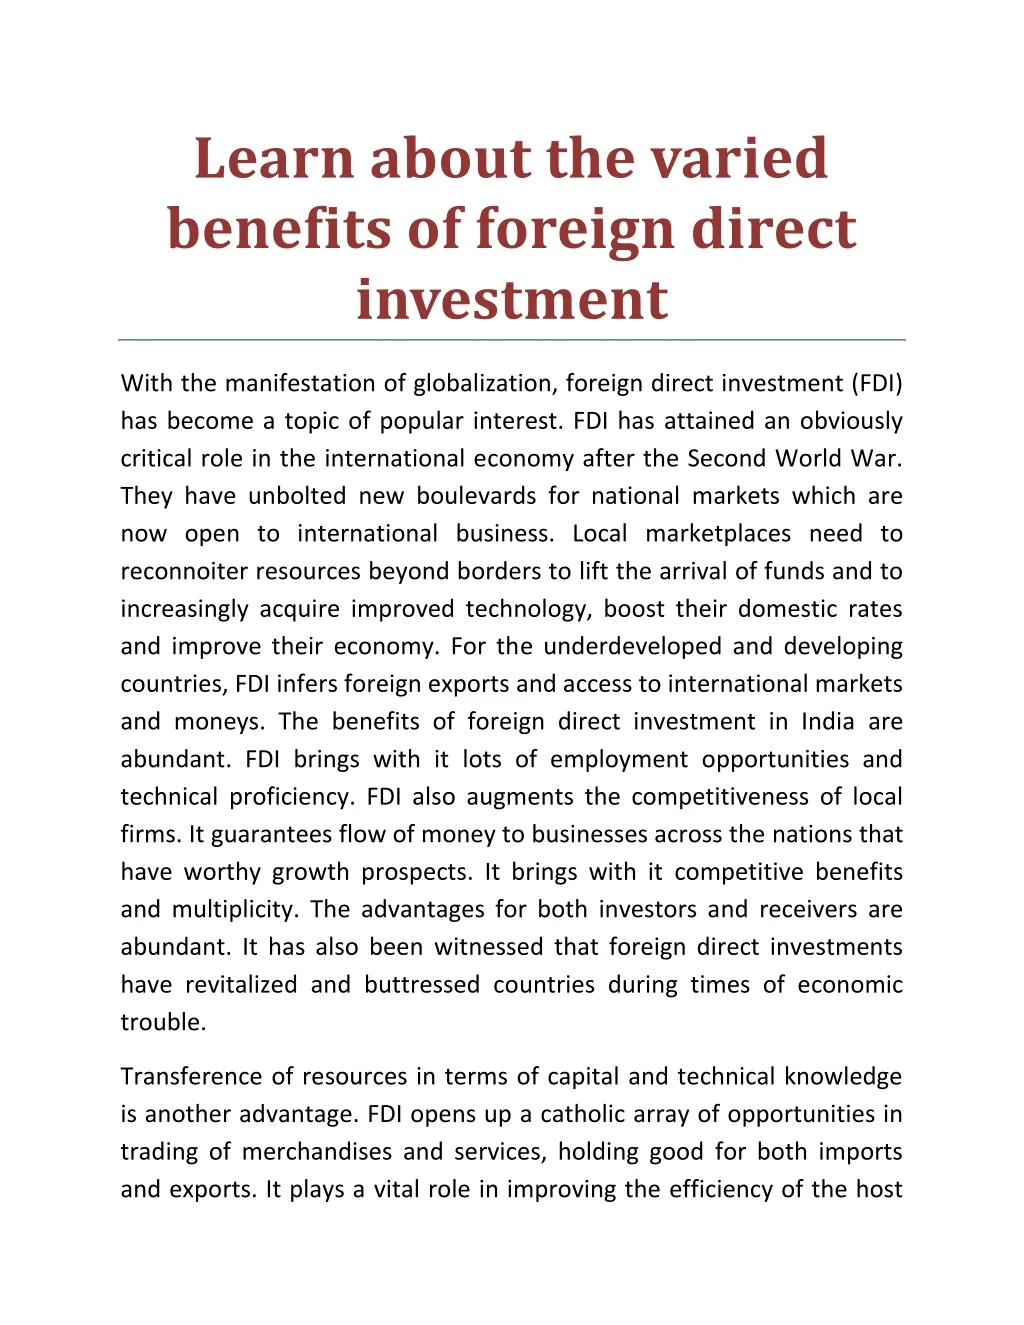 learn about the varied benefits of foreign direct